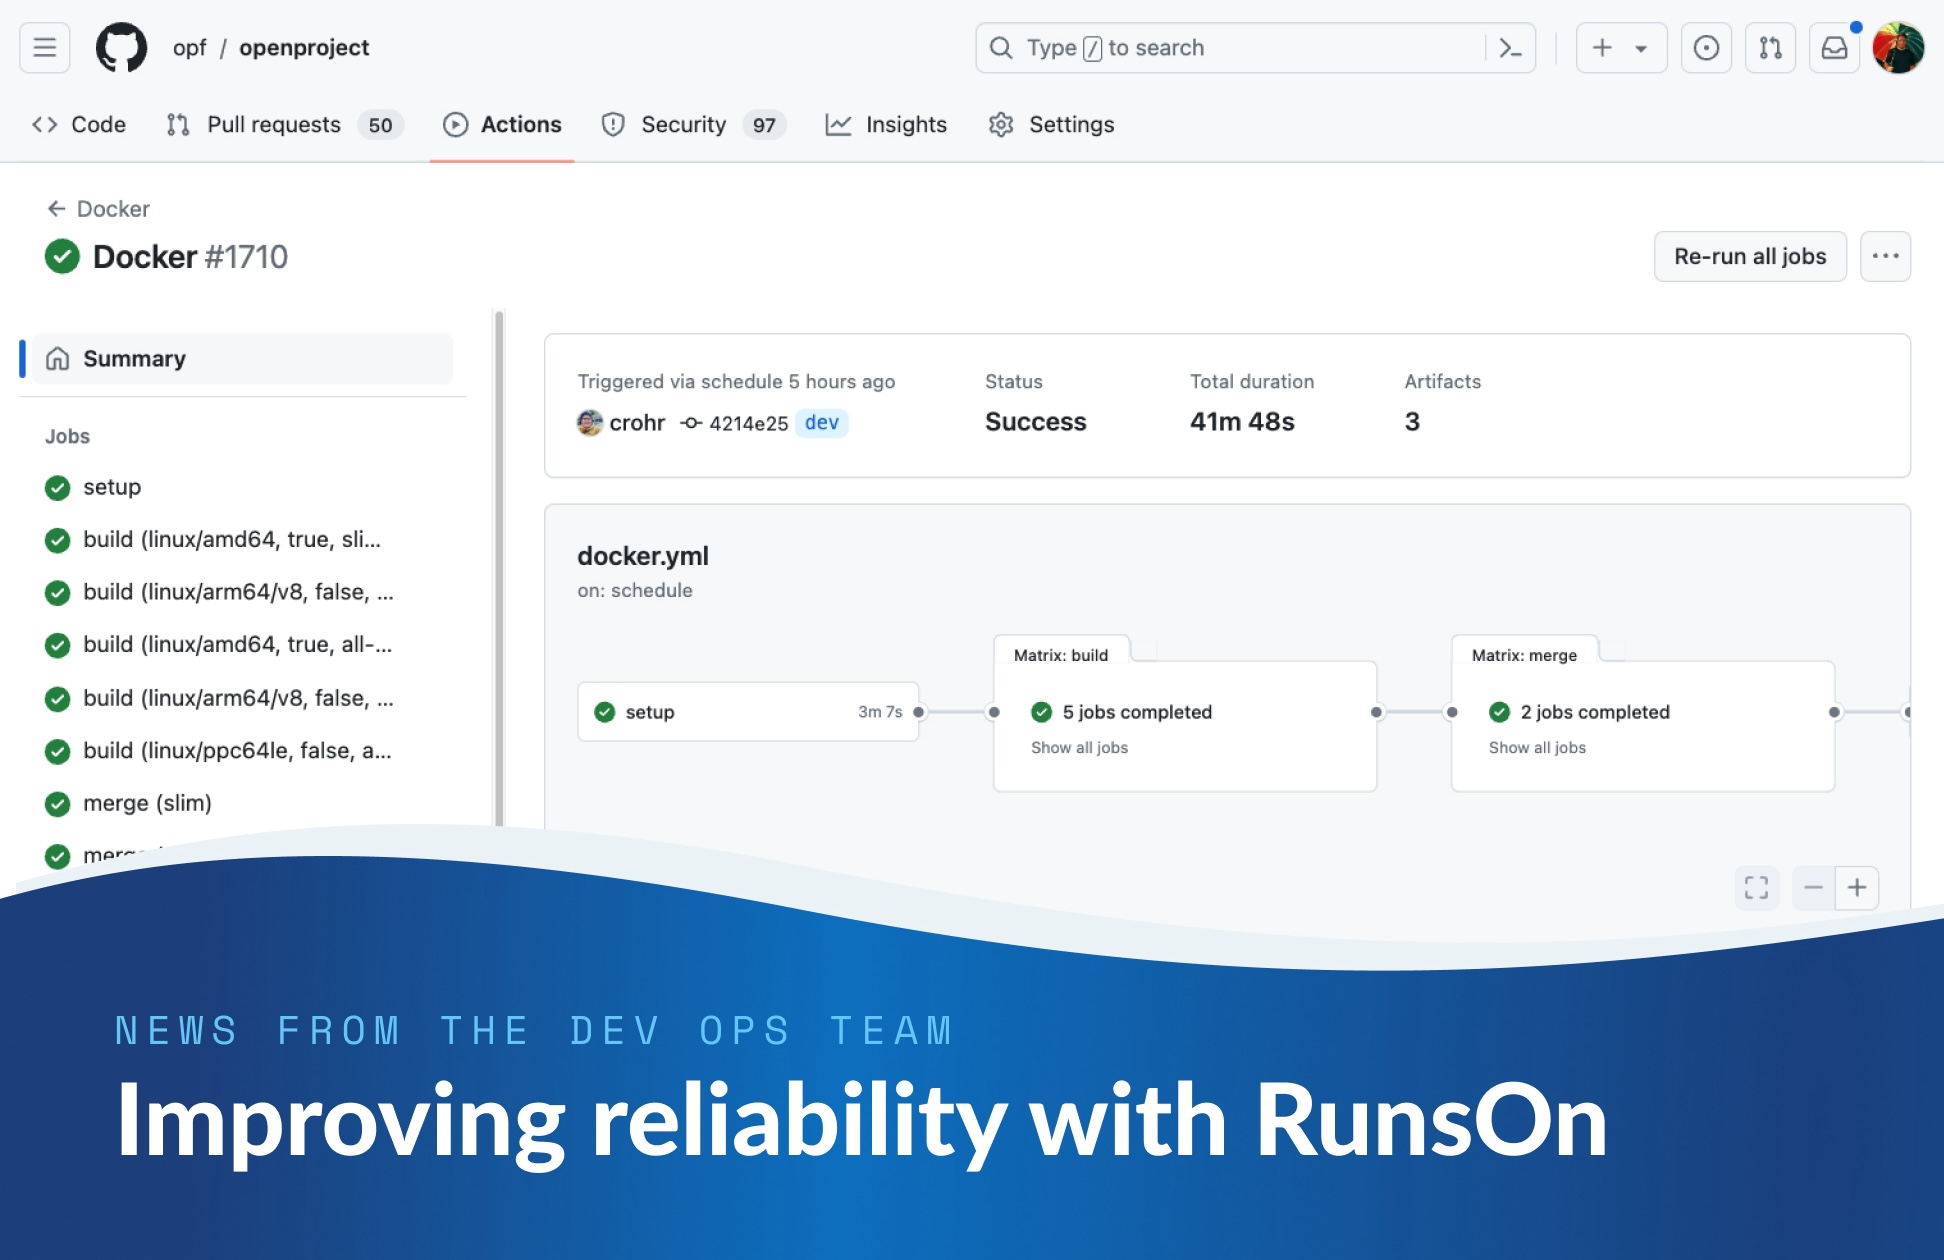 News from the DevOps team: Improving our CI/CD reliability with RunsOn